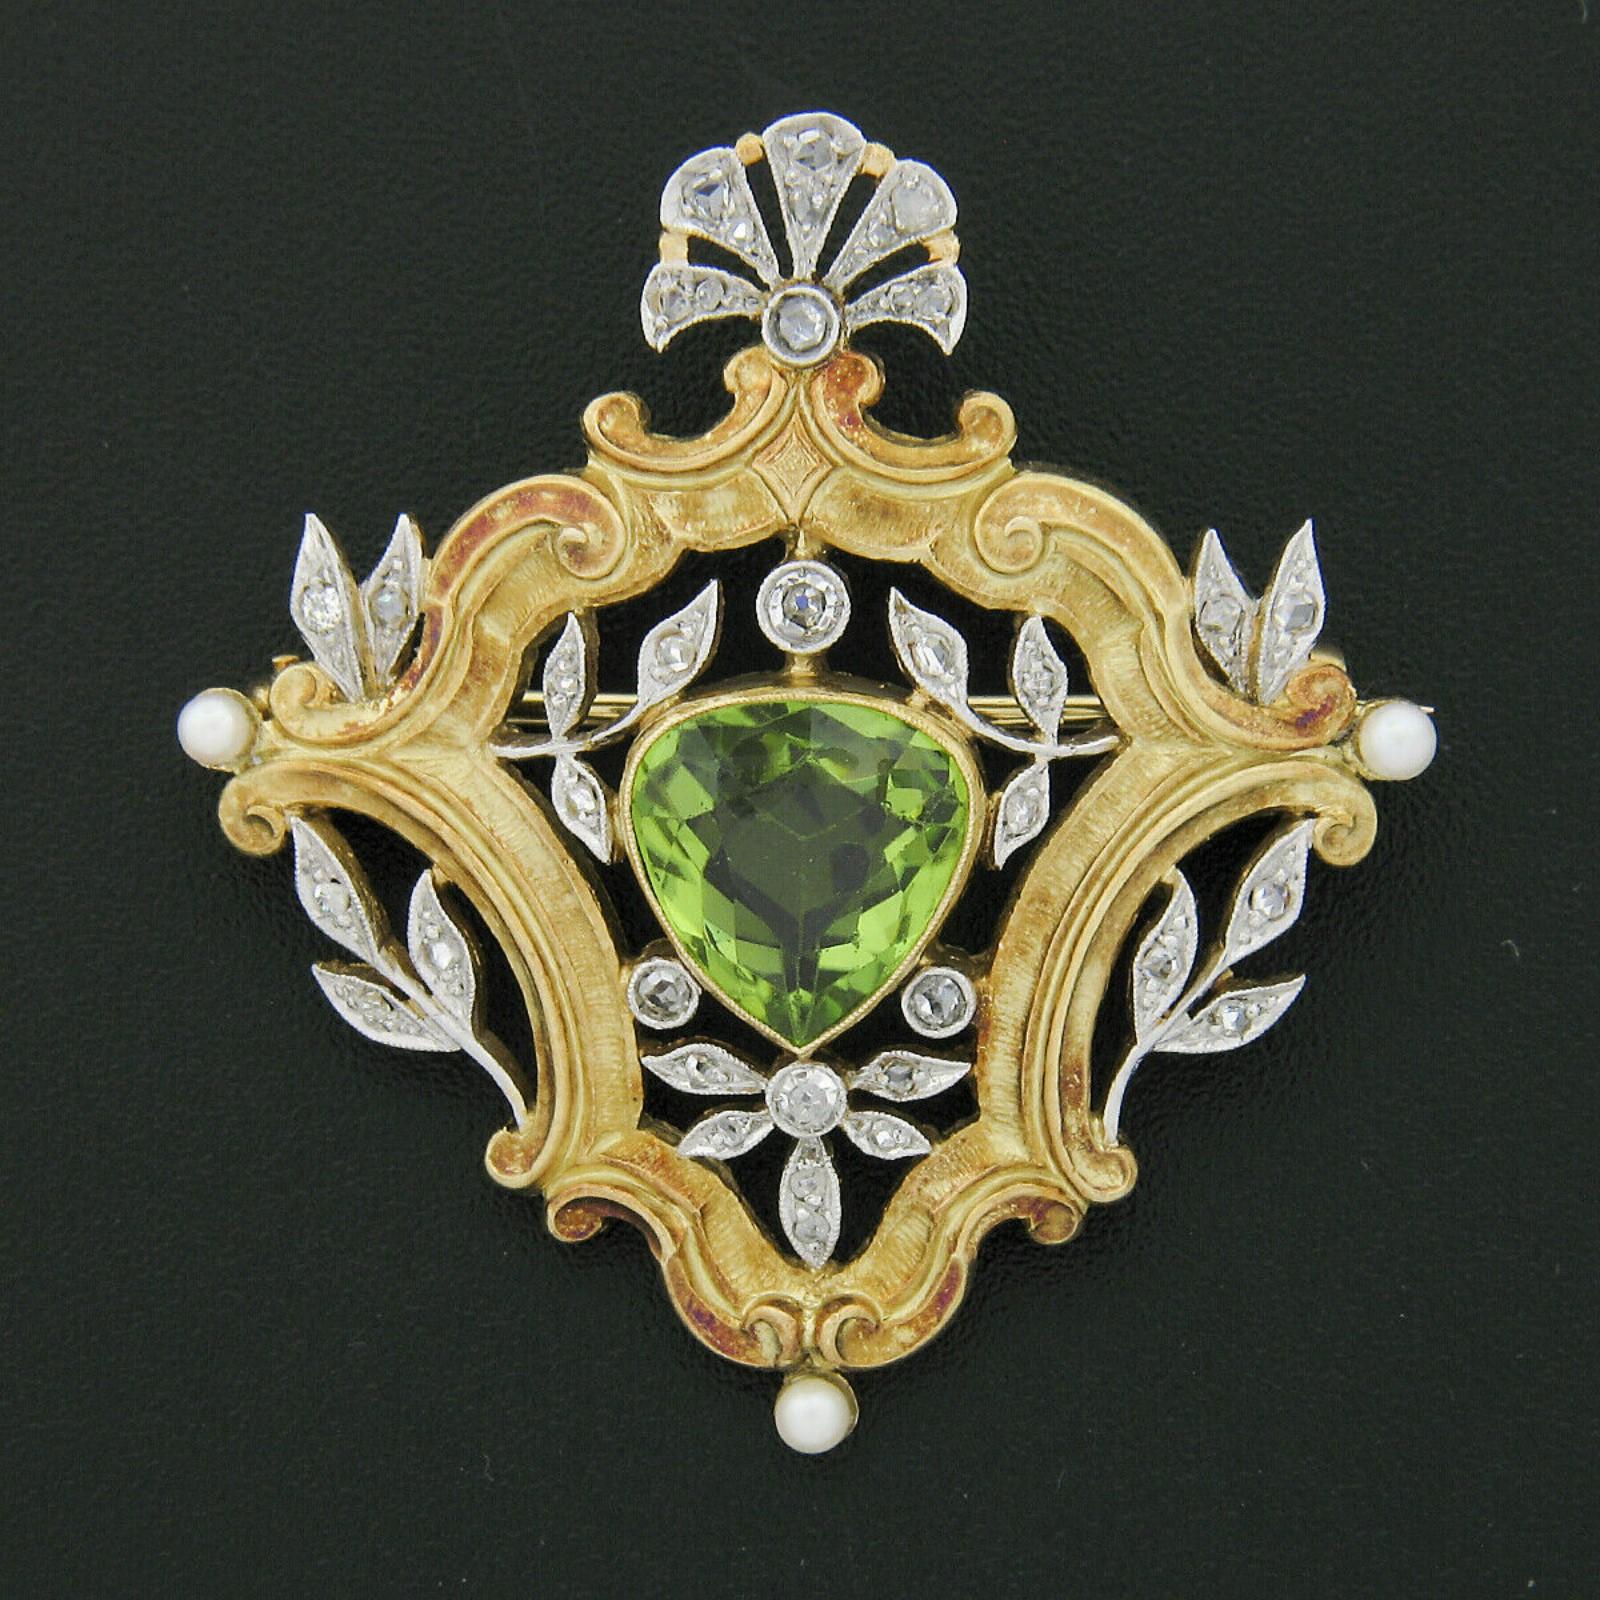 Here we have a magnificent antique brooch that was crafted from solid 18k yellow gold with platinum top during the Edwardian era. The brooch features an approximately 3.68 carat, GIA certified, natural peridot with a rich and pleasing yellow-green